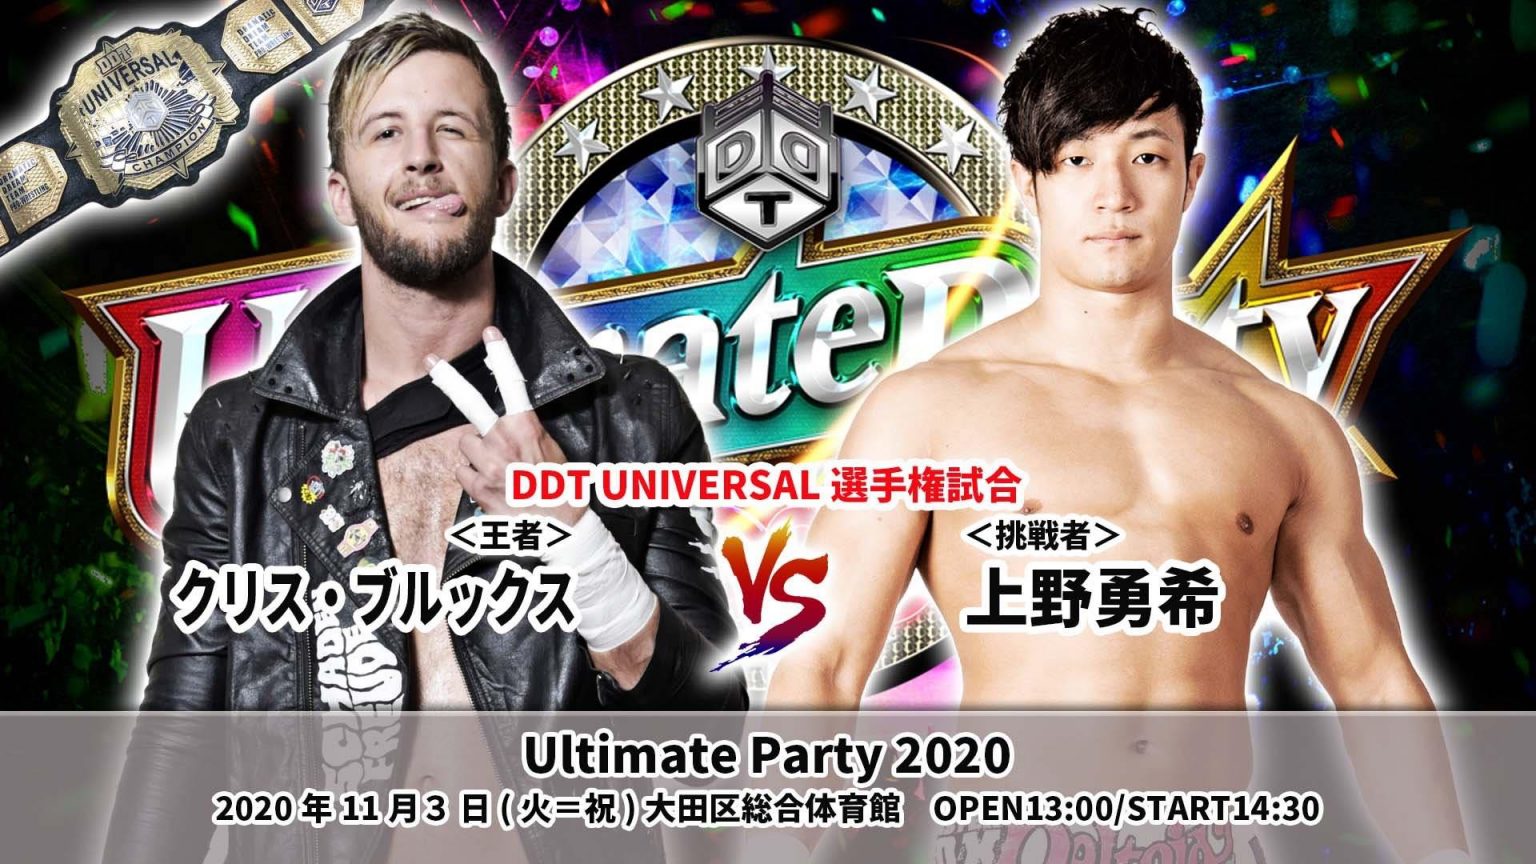 DDT ULTIMATE PARTY 2020 Preview